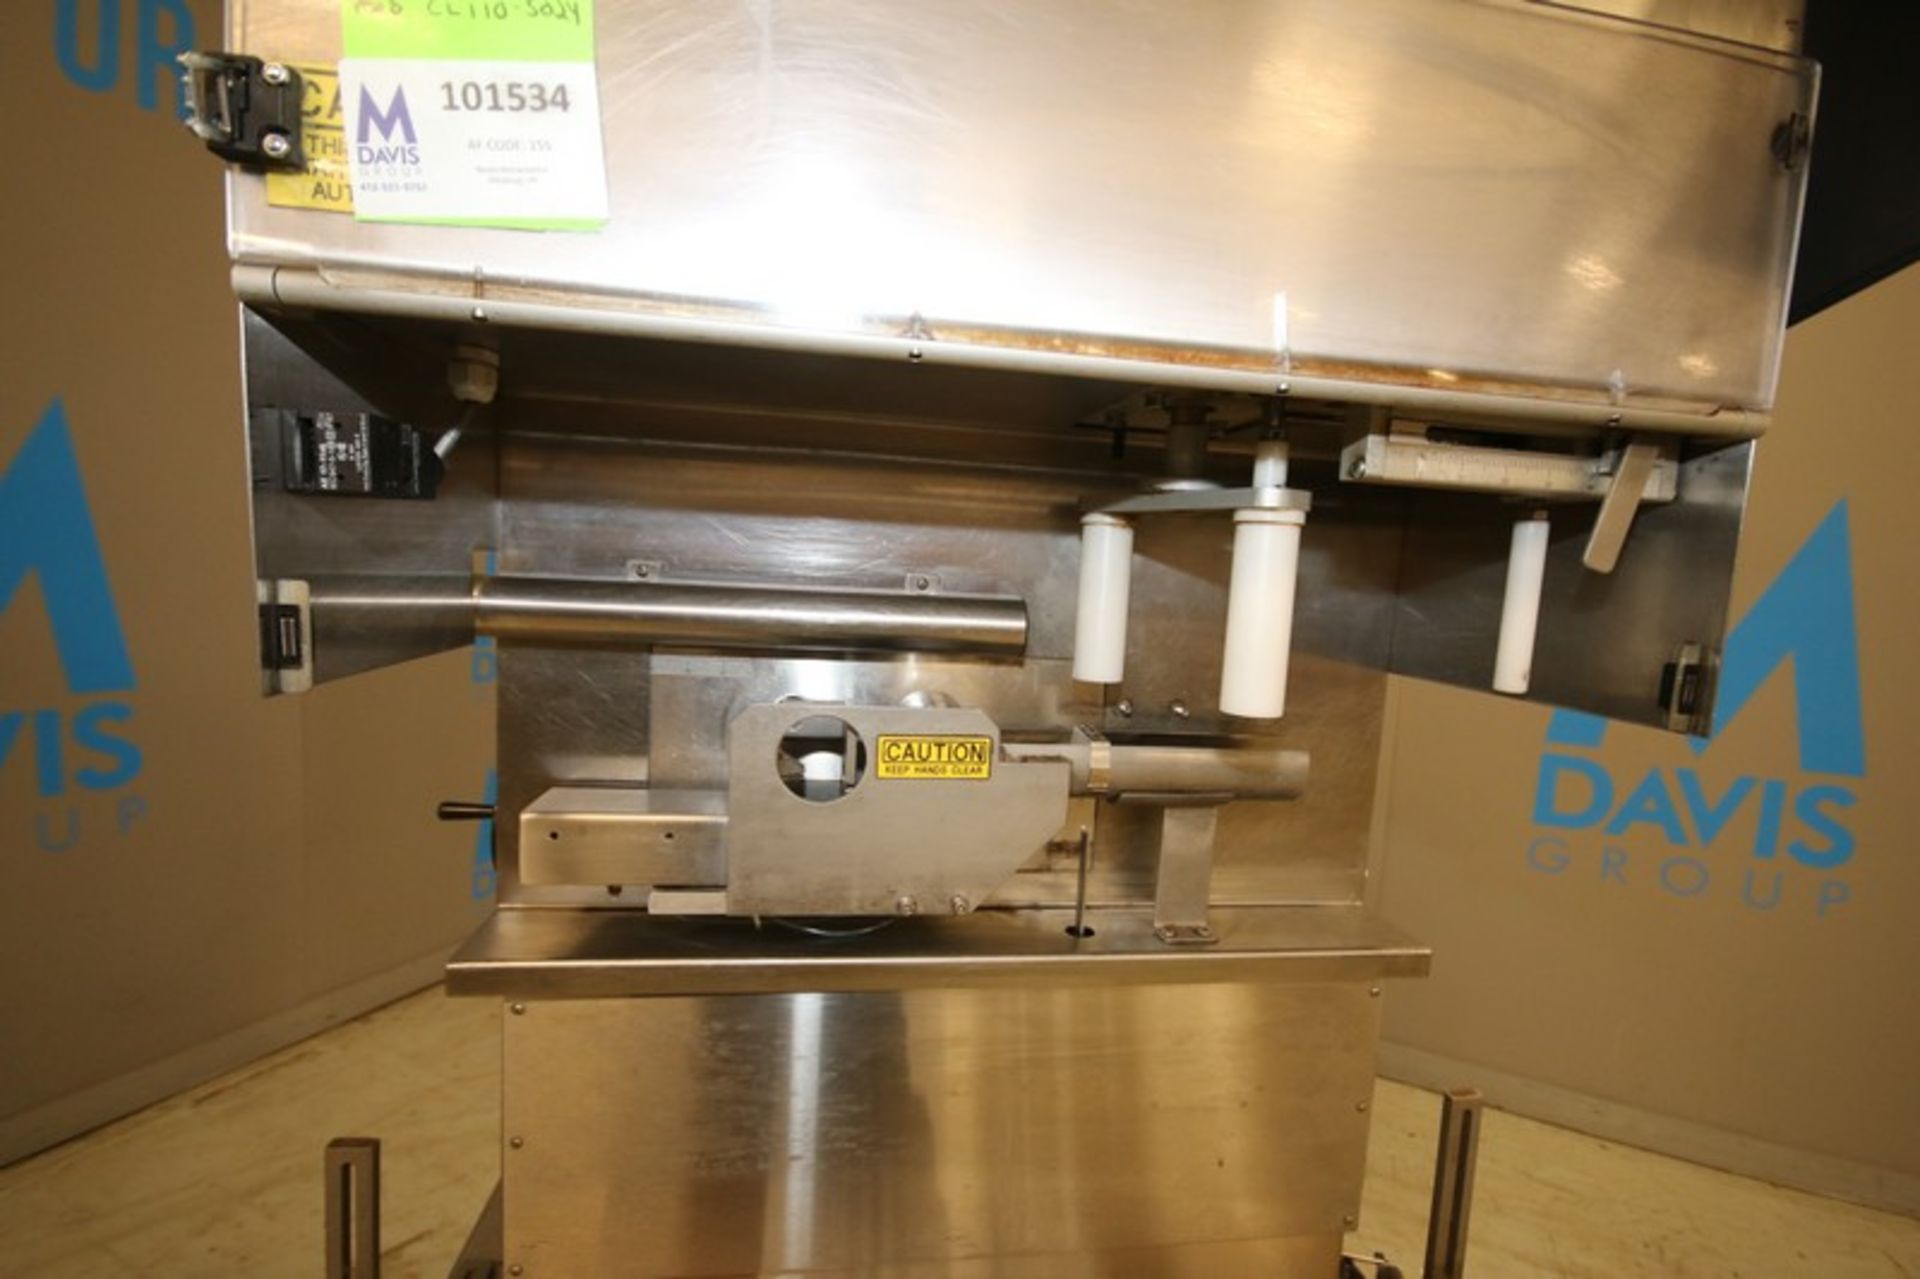 NJM / CLI S/S Fully Automatic Cottoner, Model CL-110-S024, SN 09735-05, with Siemens TD200 - Image 2 of 9